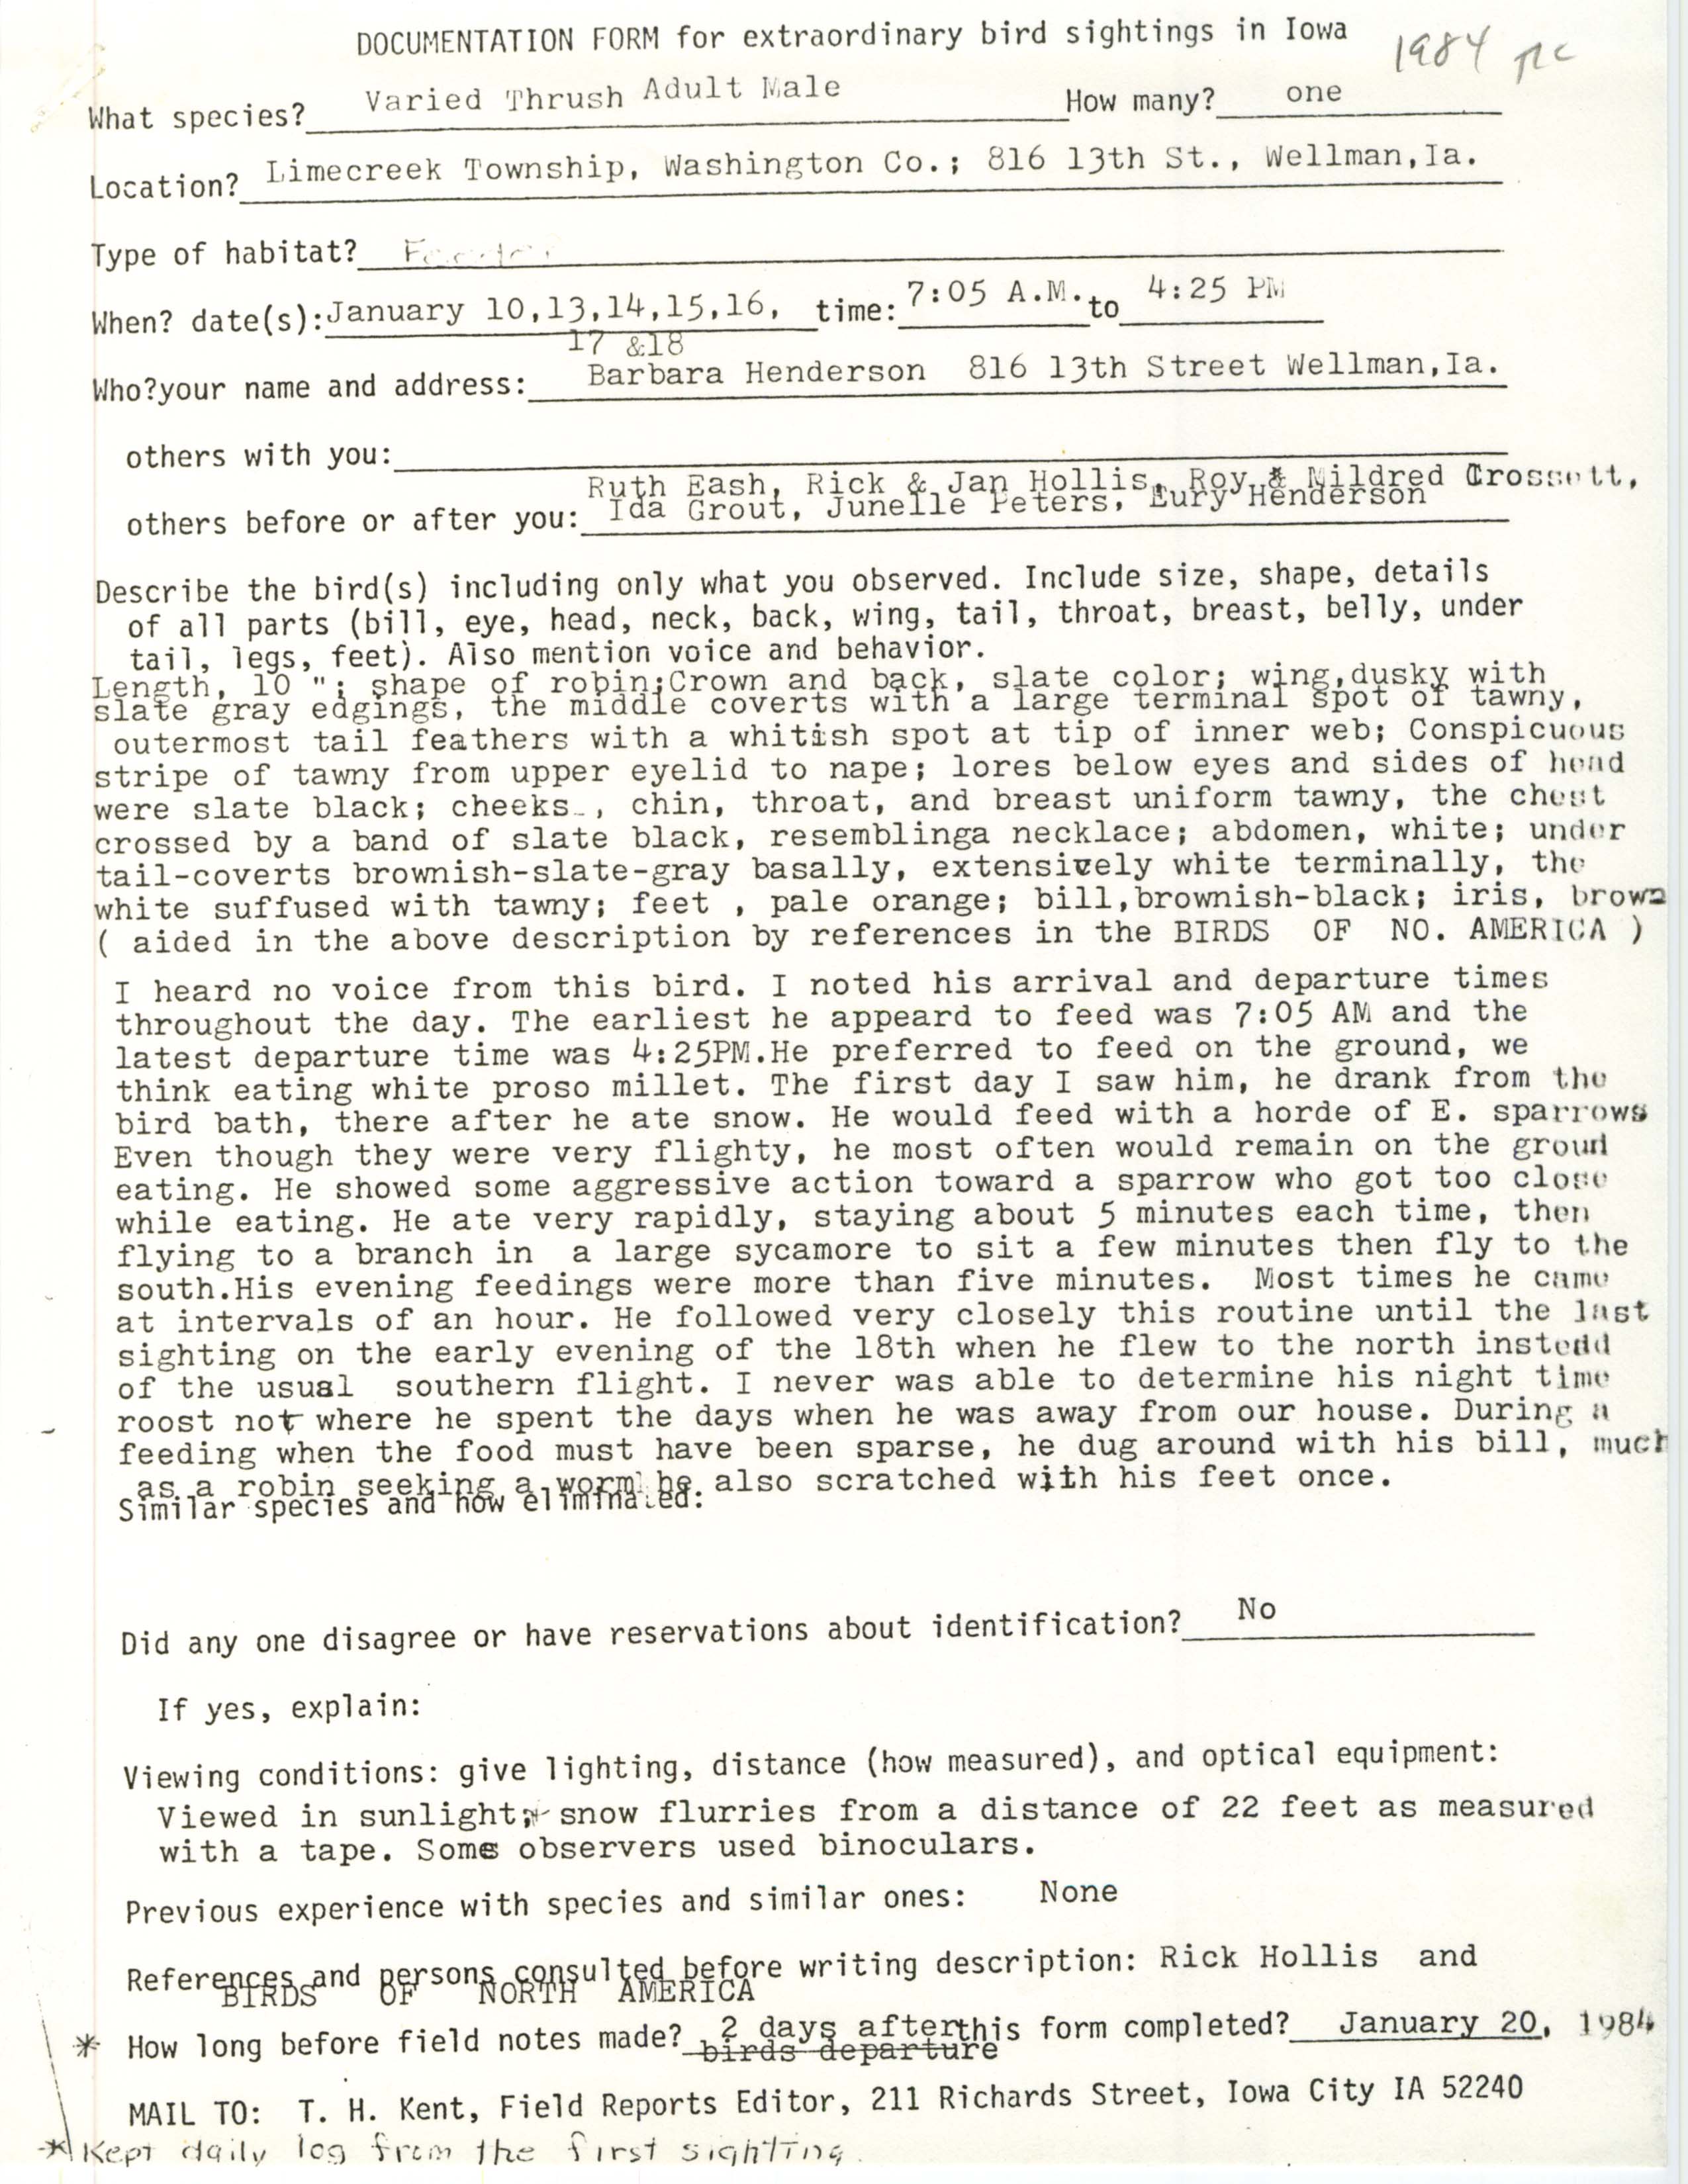 Rare bird documentation form for Varied Thrush at Lime Creek Township in Washington County in 1984